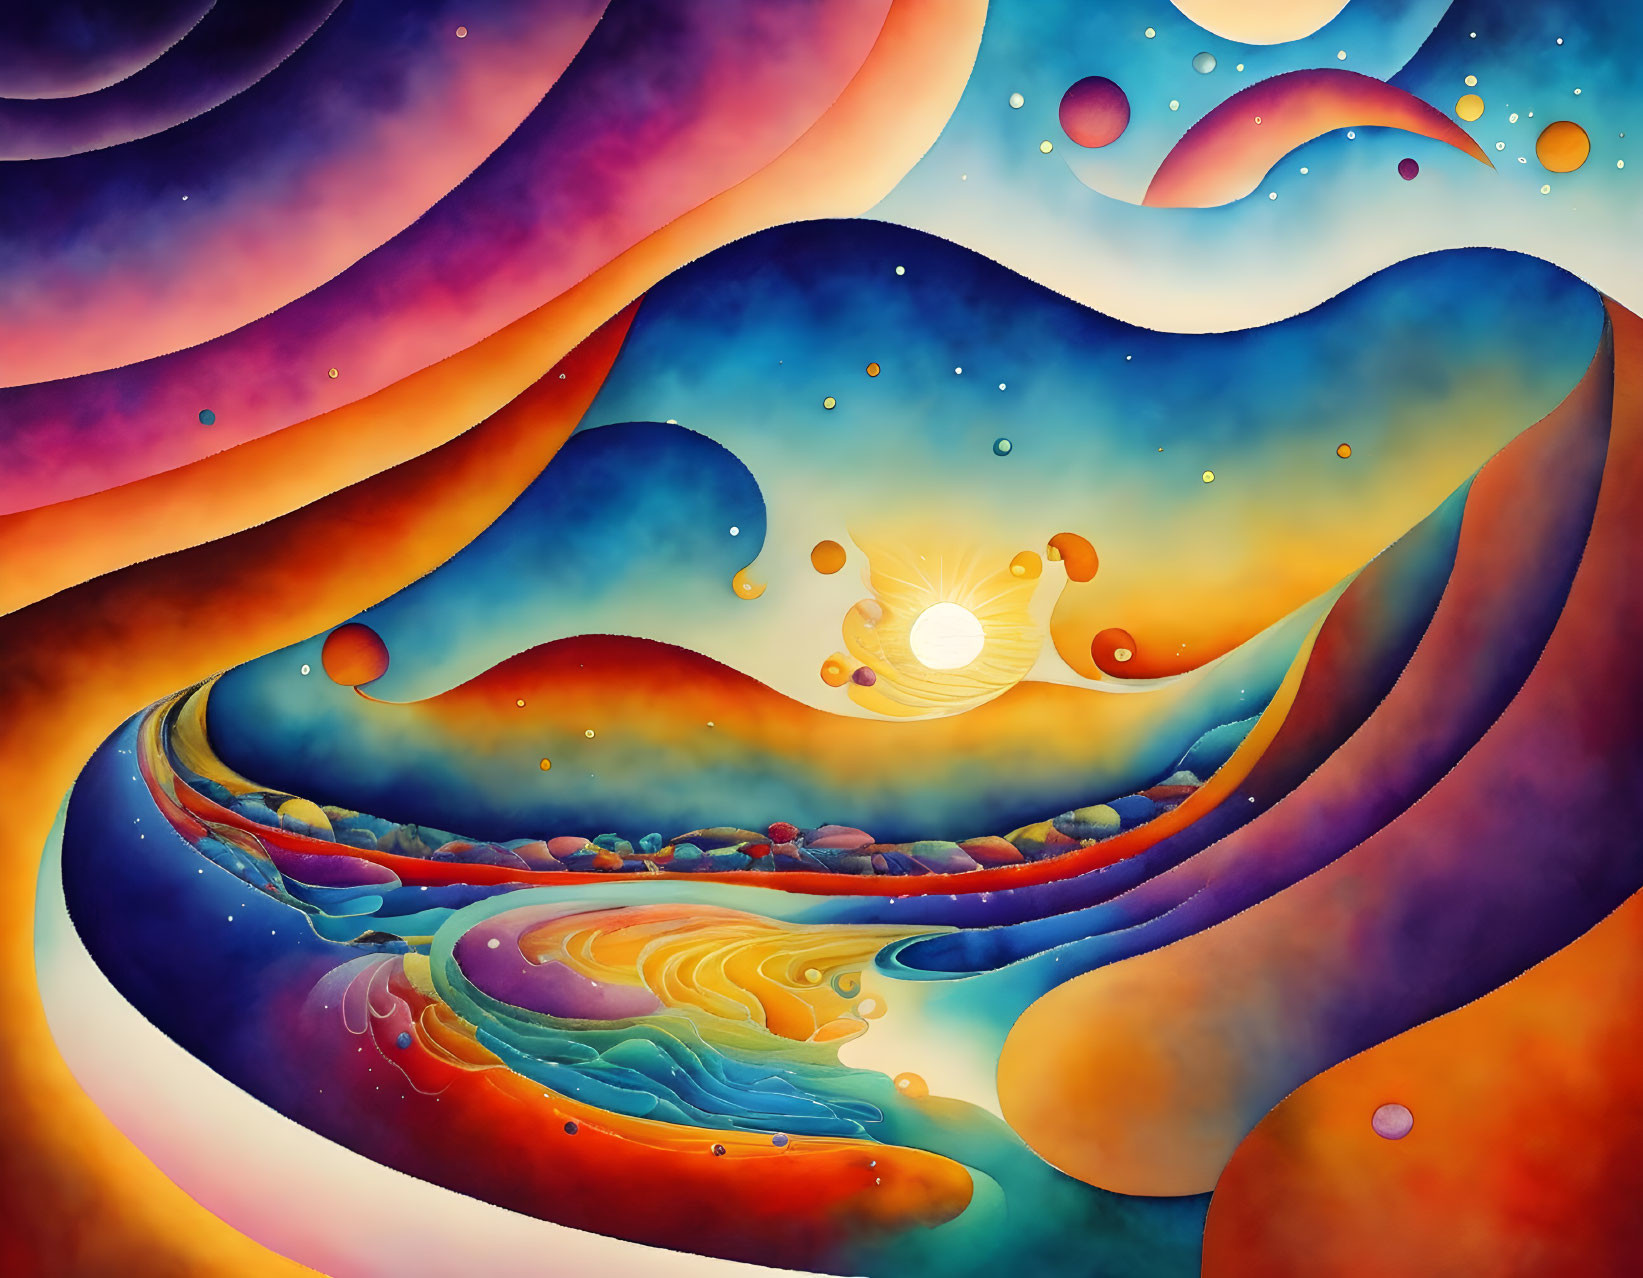 Colorful abstract artwork with swirling patterns in surreal landscape